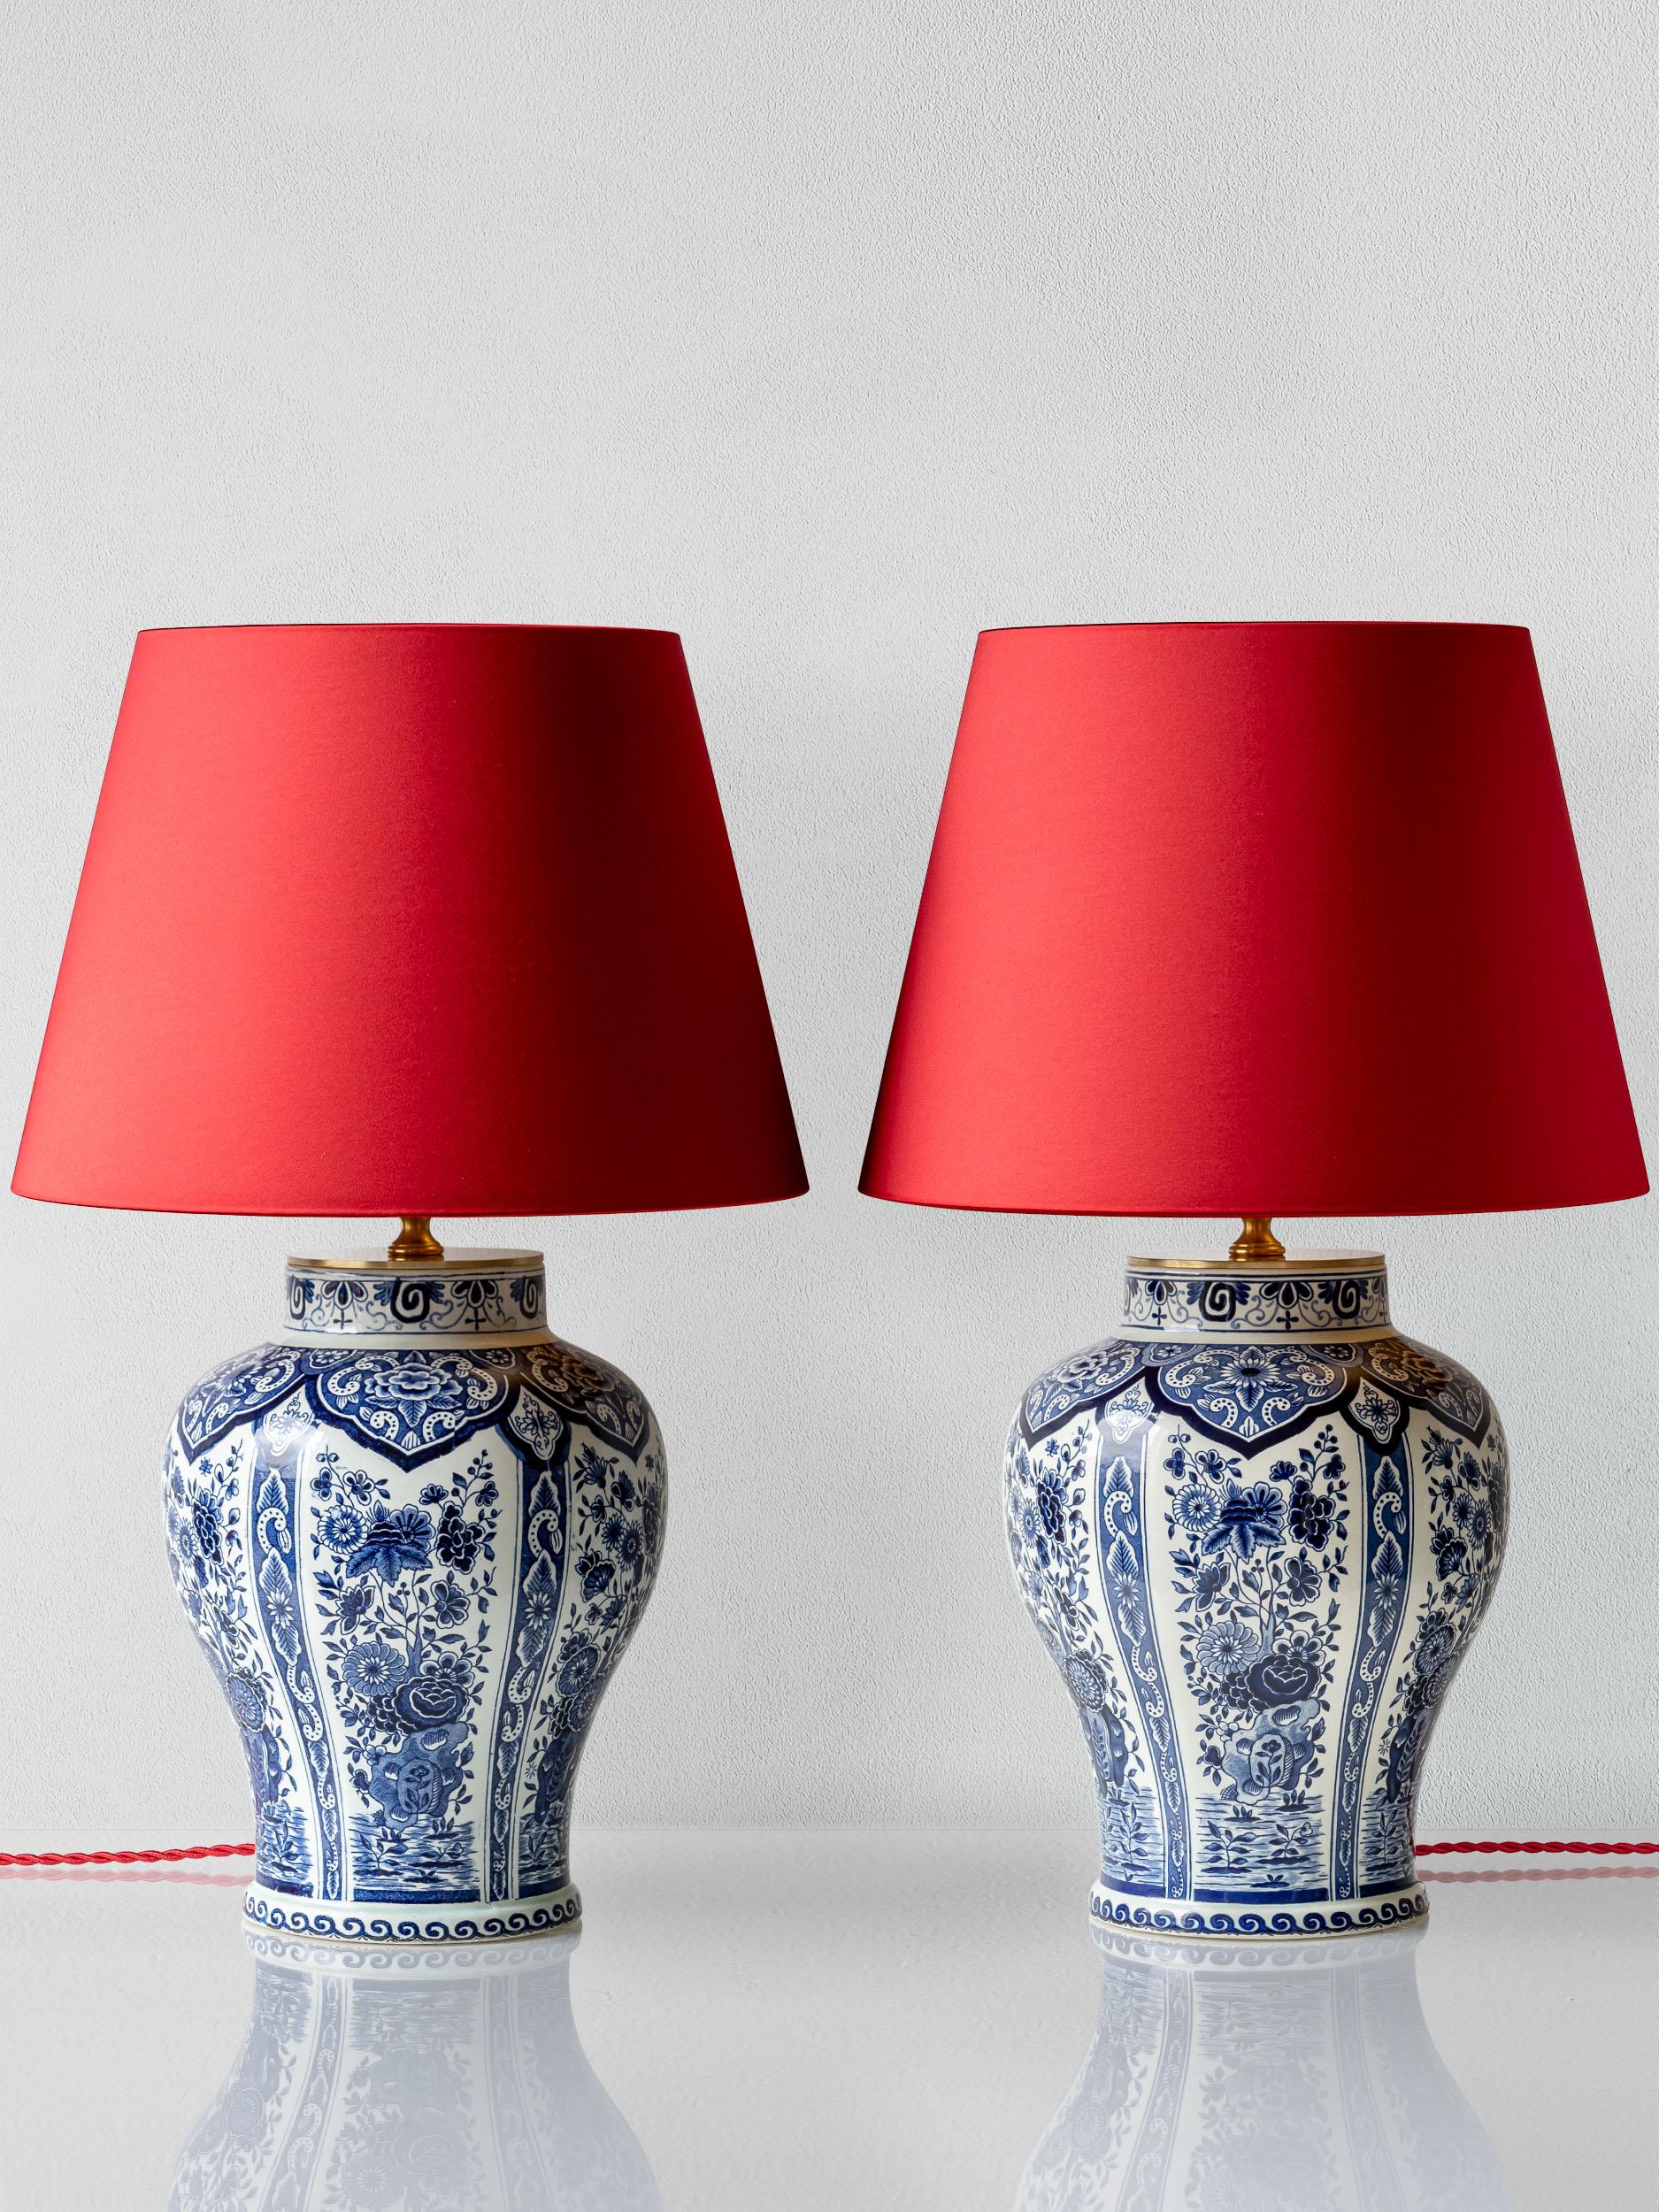 Meet Scarlet and Rhett! These one-of-a-kind lamps have been lovingly handcrafted from two vintage vases designed by Boch Frères Keramis in La Louviere, Belgium for Royal Sphinx (formerly Petrus Regout) in Maastricht, the Netherlands. Paired with